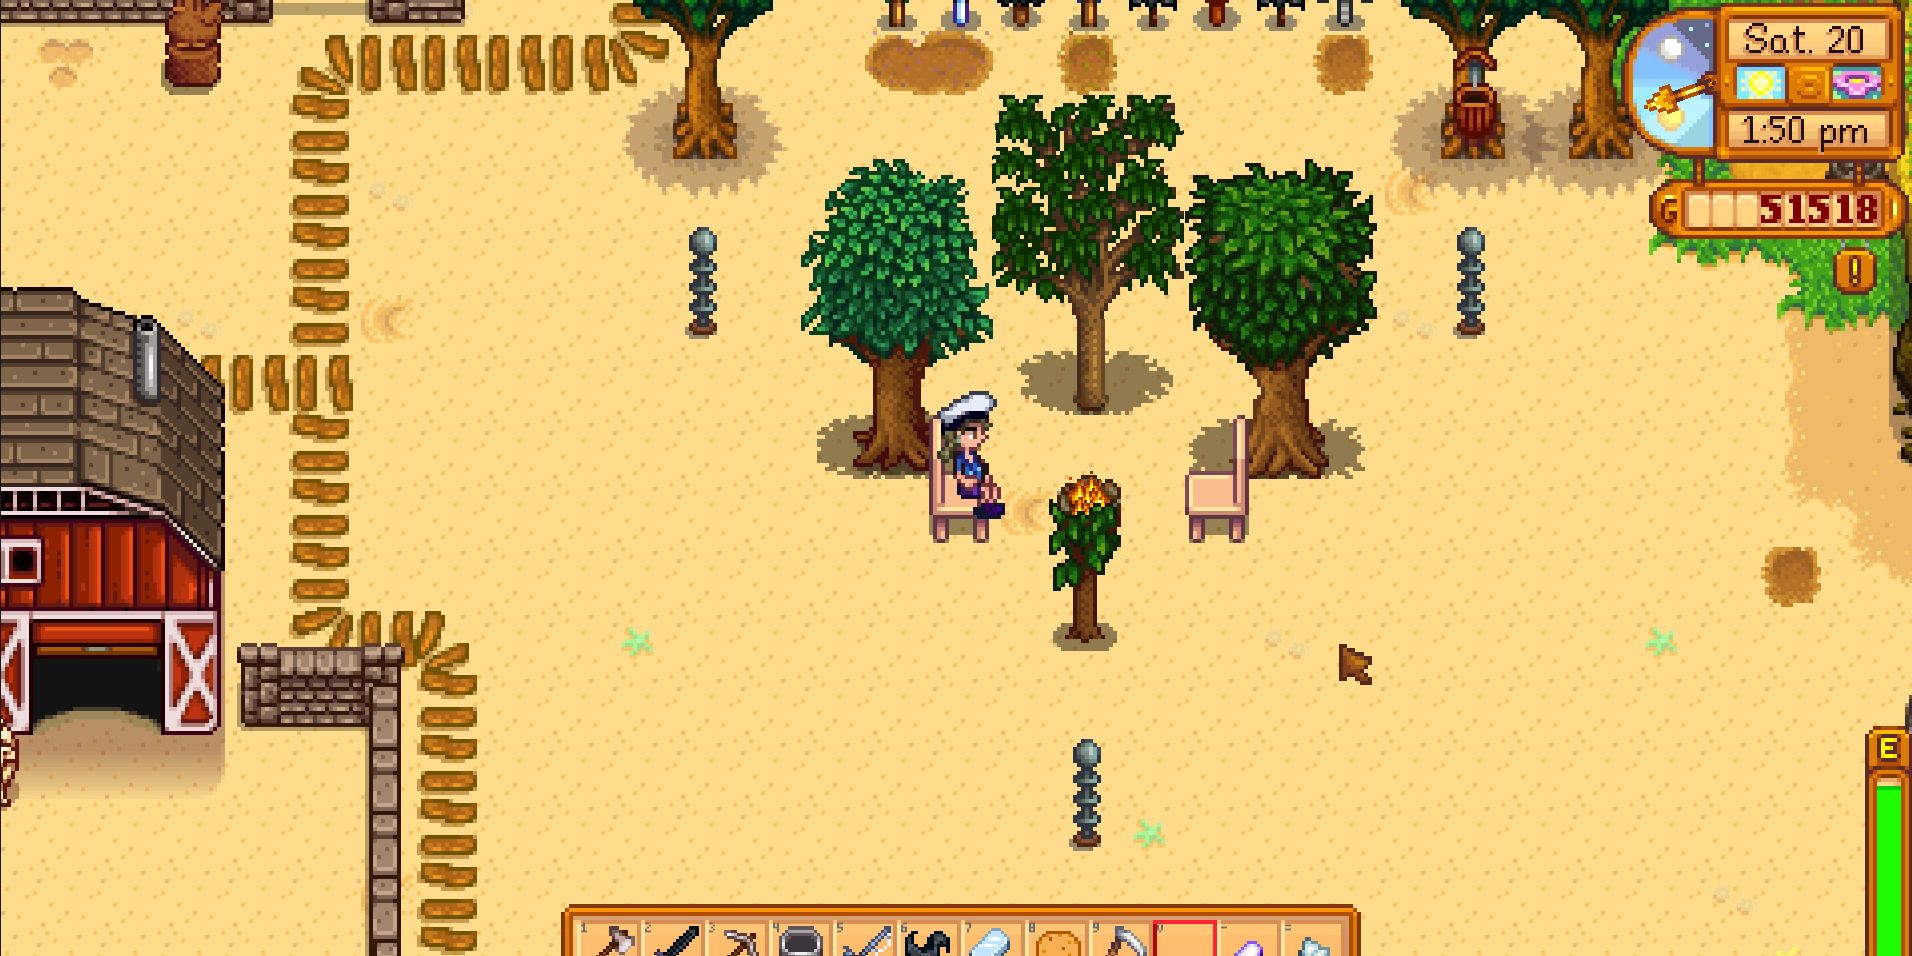 Image of a character's setup of Lightning Rods on their farm in Stardew Valley